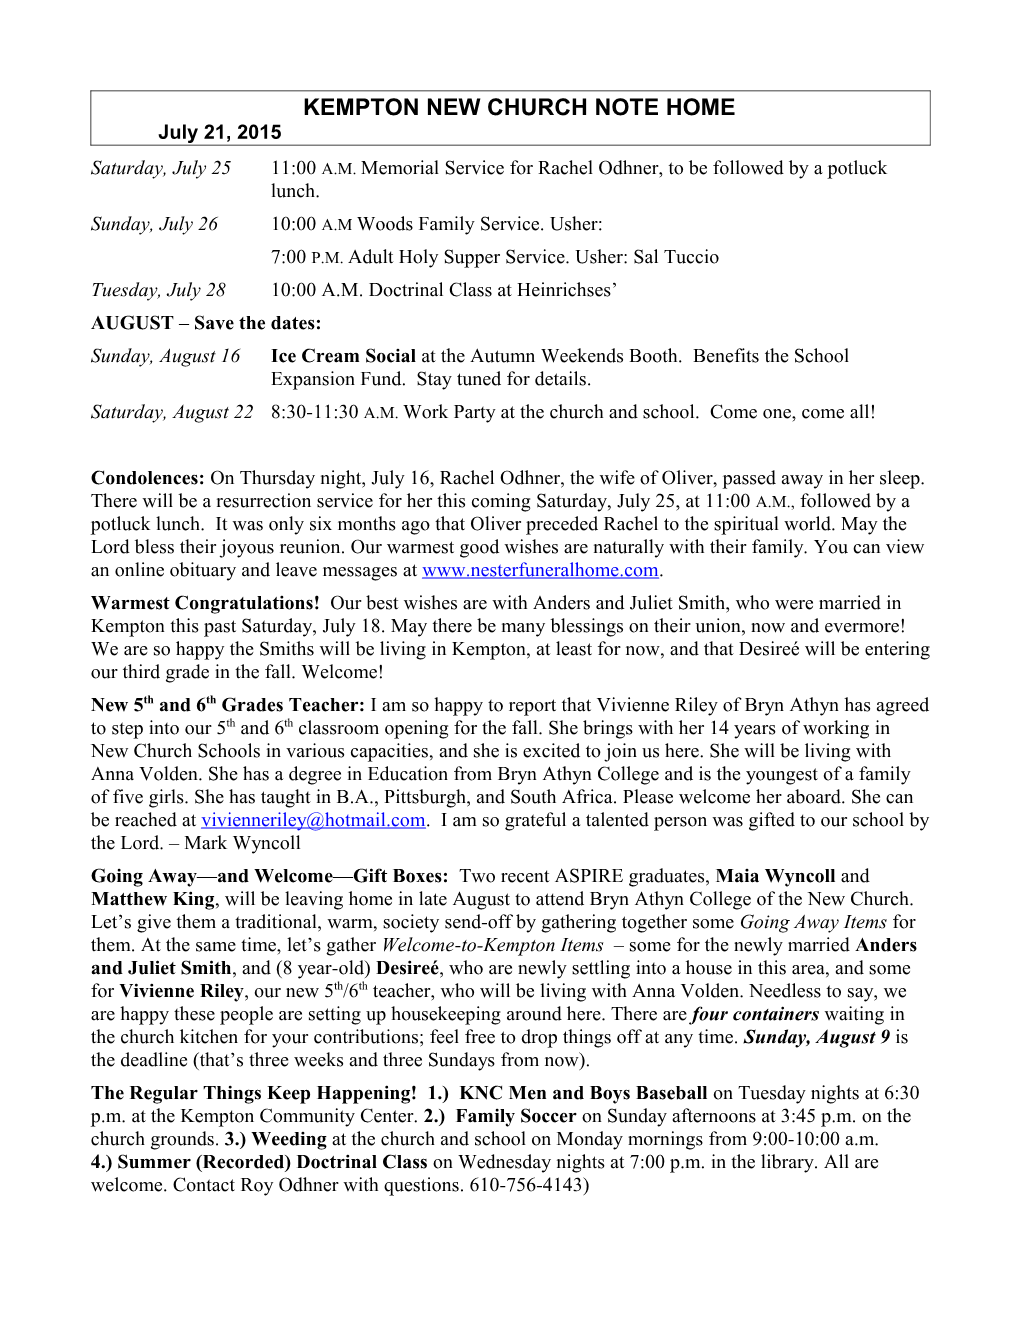 KEMPTON NEW CHURCH NOTE HOME July 21, 2015 Page 3